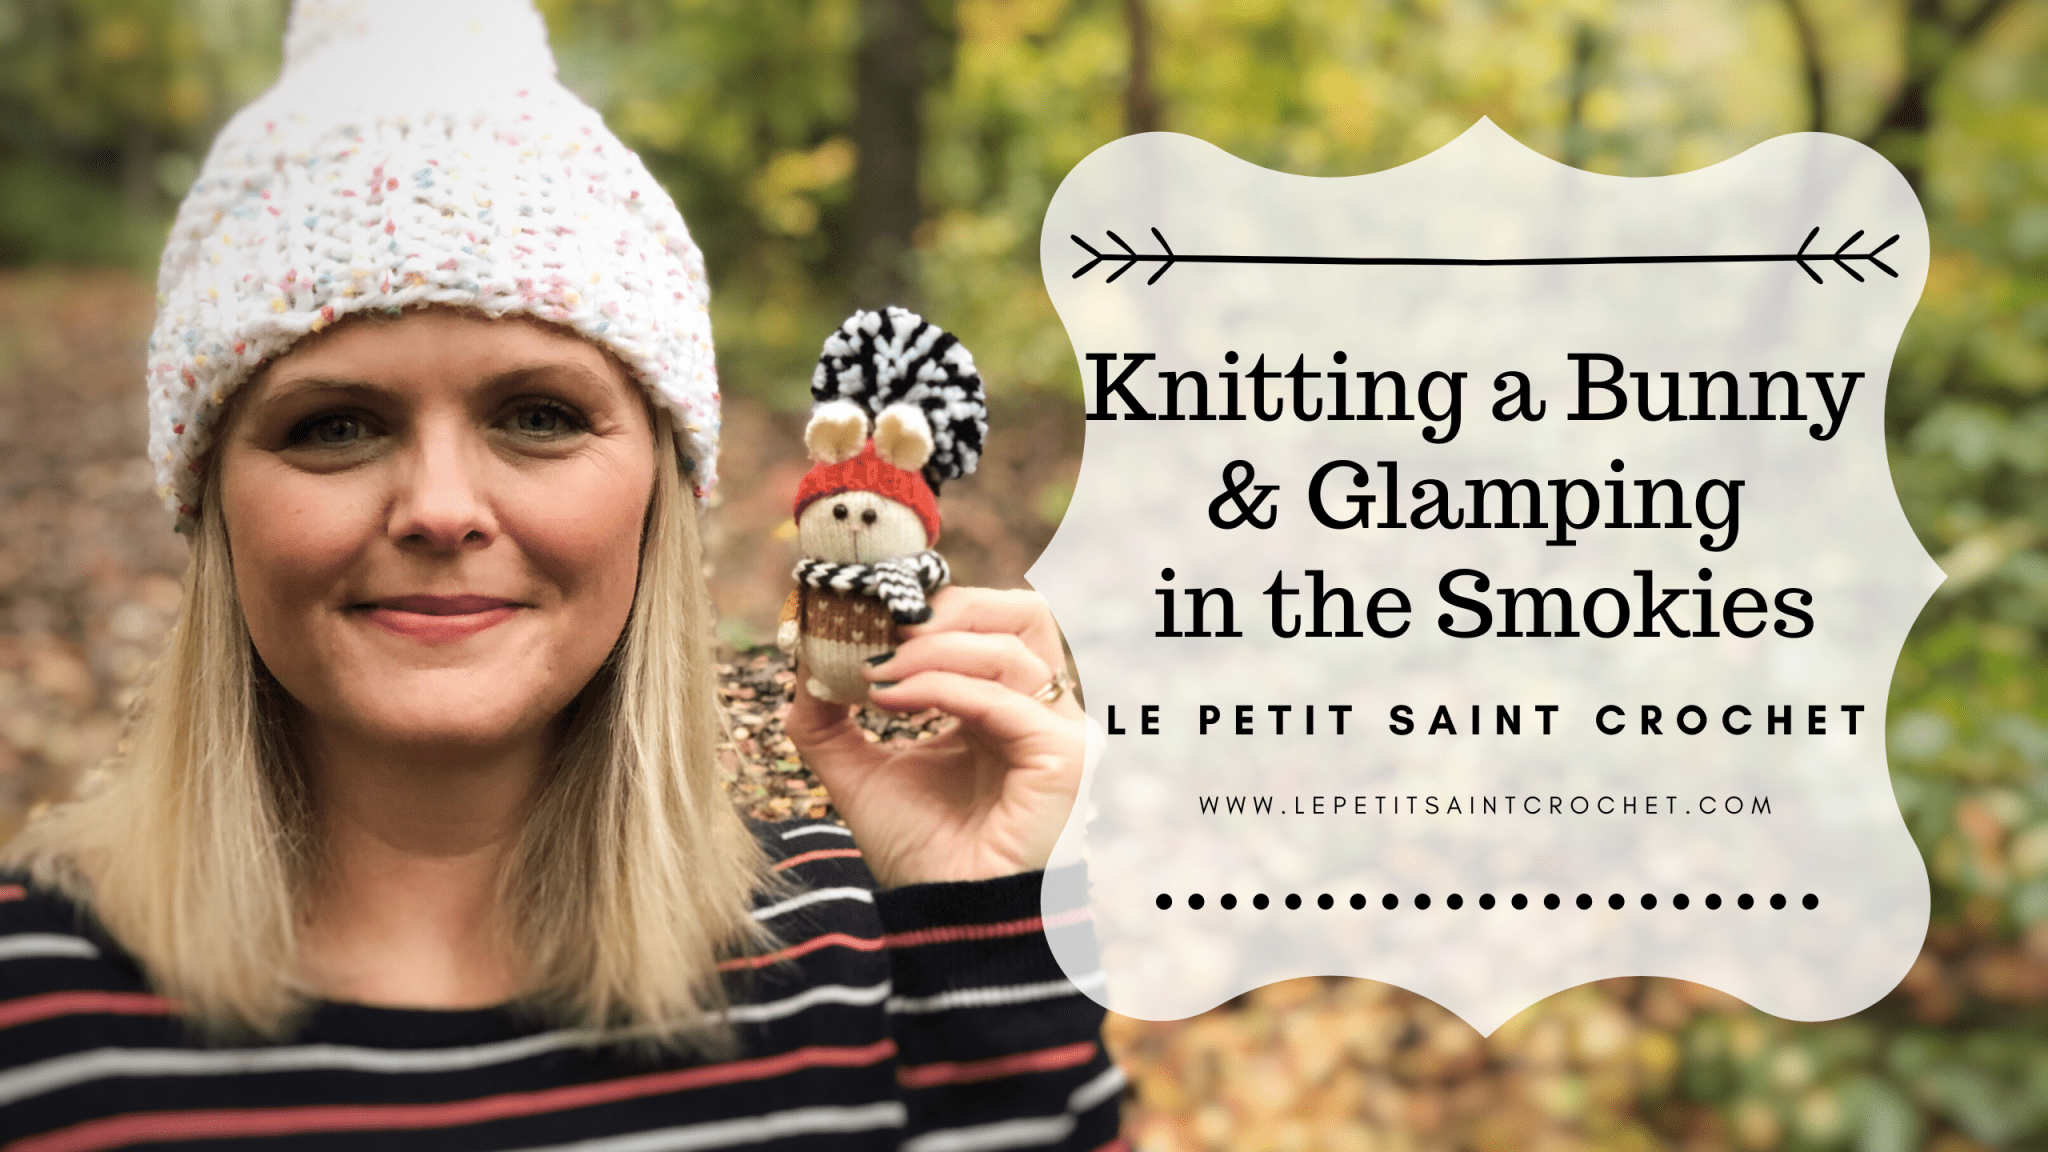 Knitting a Bunny & Glamping in the Smokies